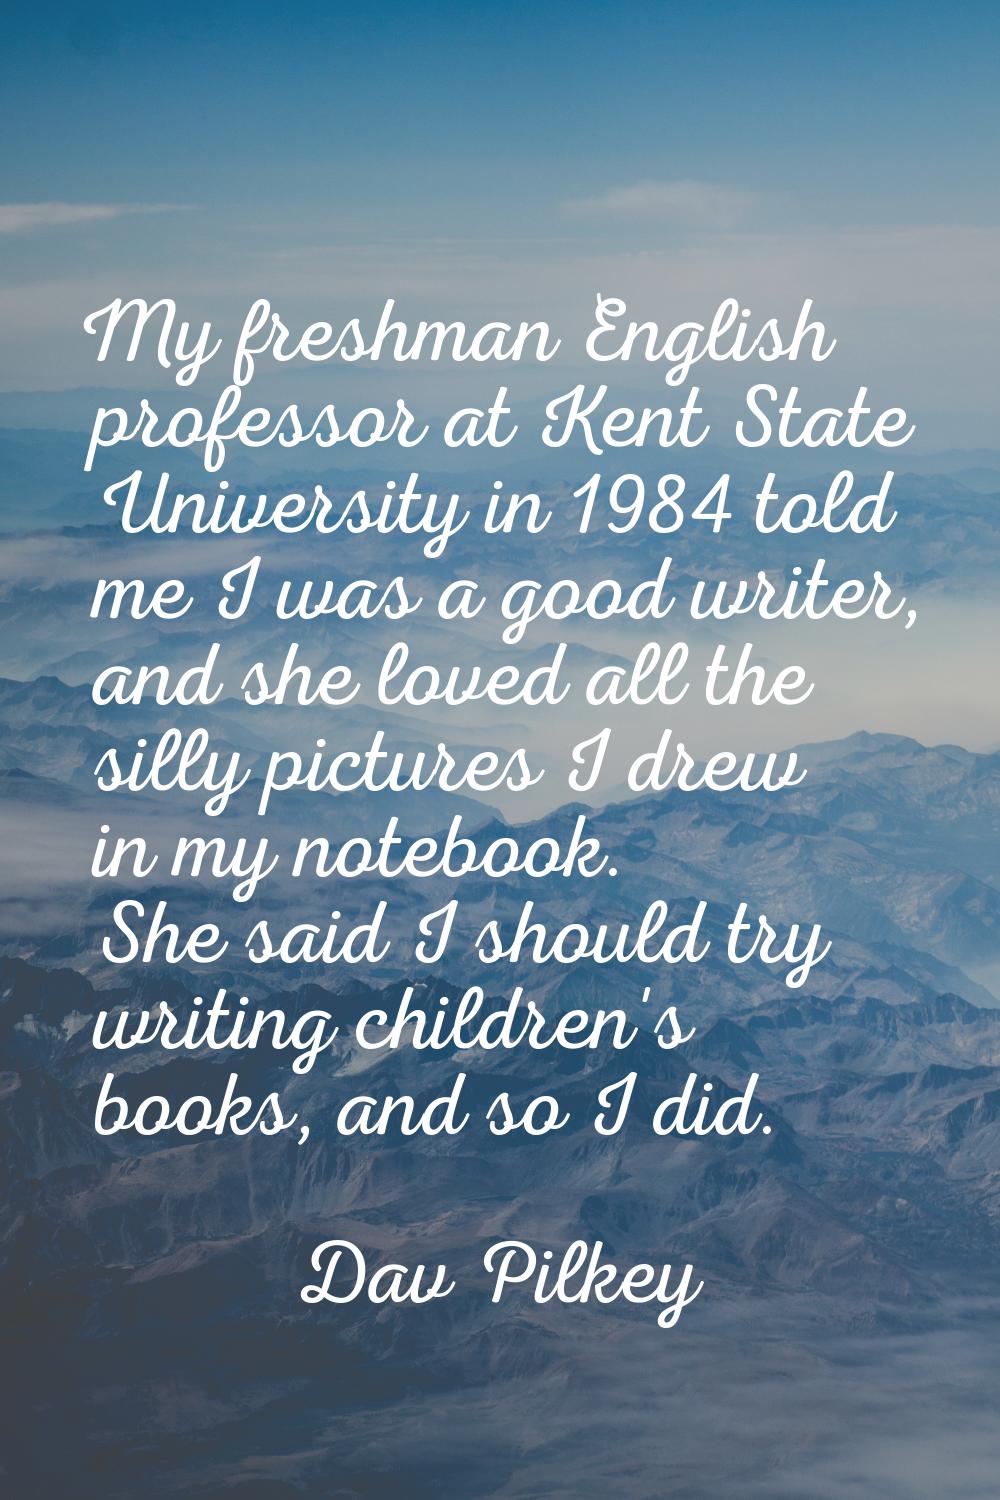 My freshman English professor at Kent State University in 1984 told me I was a good writer, and she